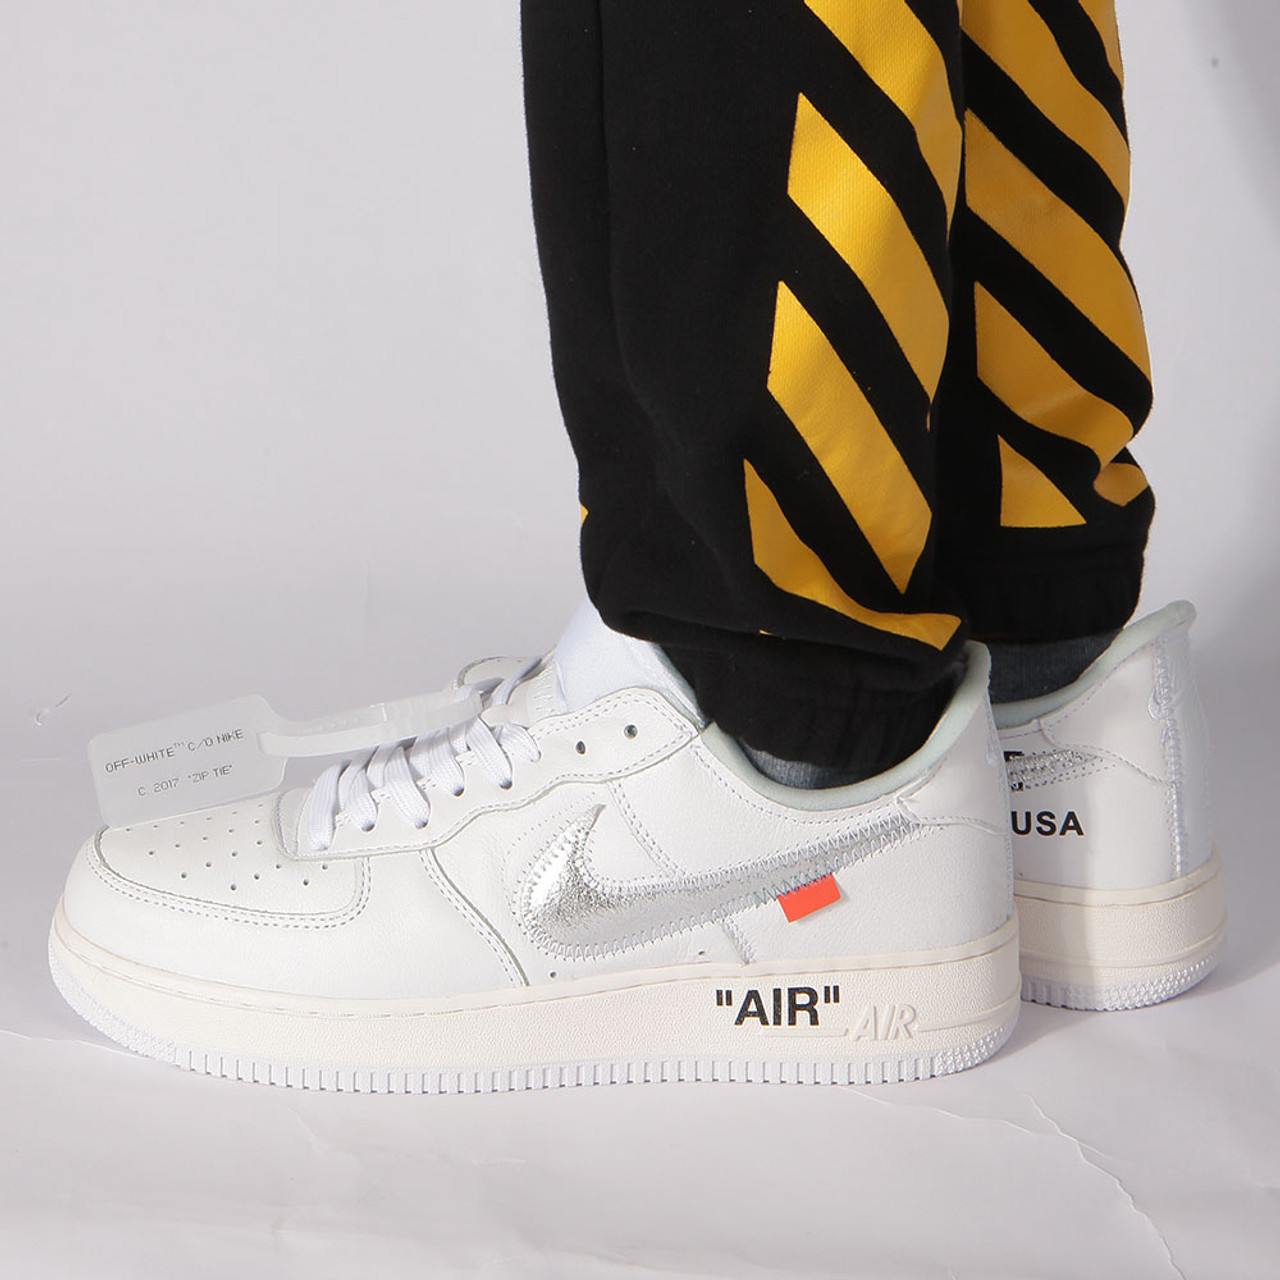 where to buy the best stockX UA High quality replica off-white x nike Air  force one AF1 white colorway sneakers Hypedripz is the best high quality  trusted clone replica fake designer hypebeast